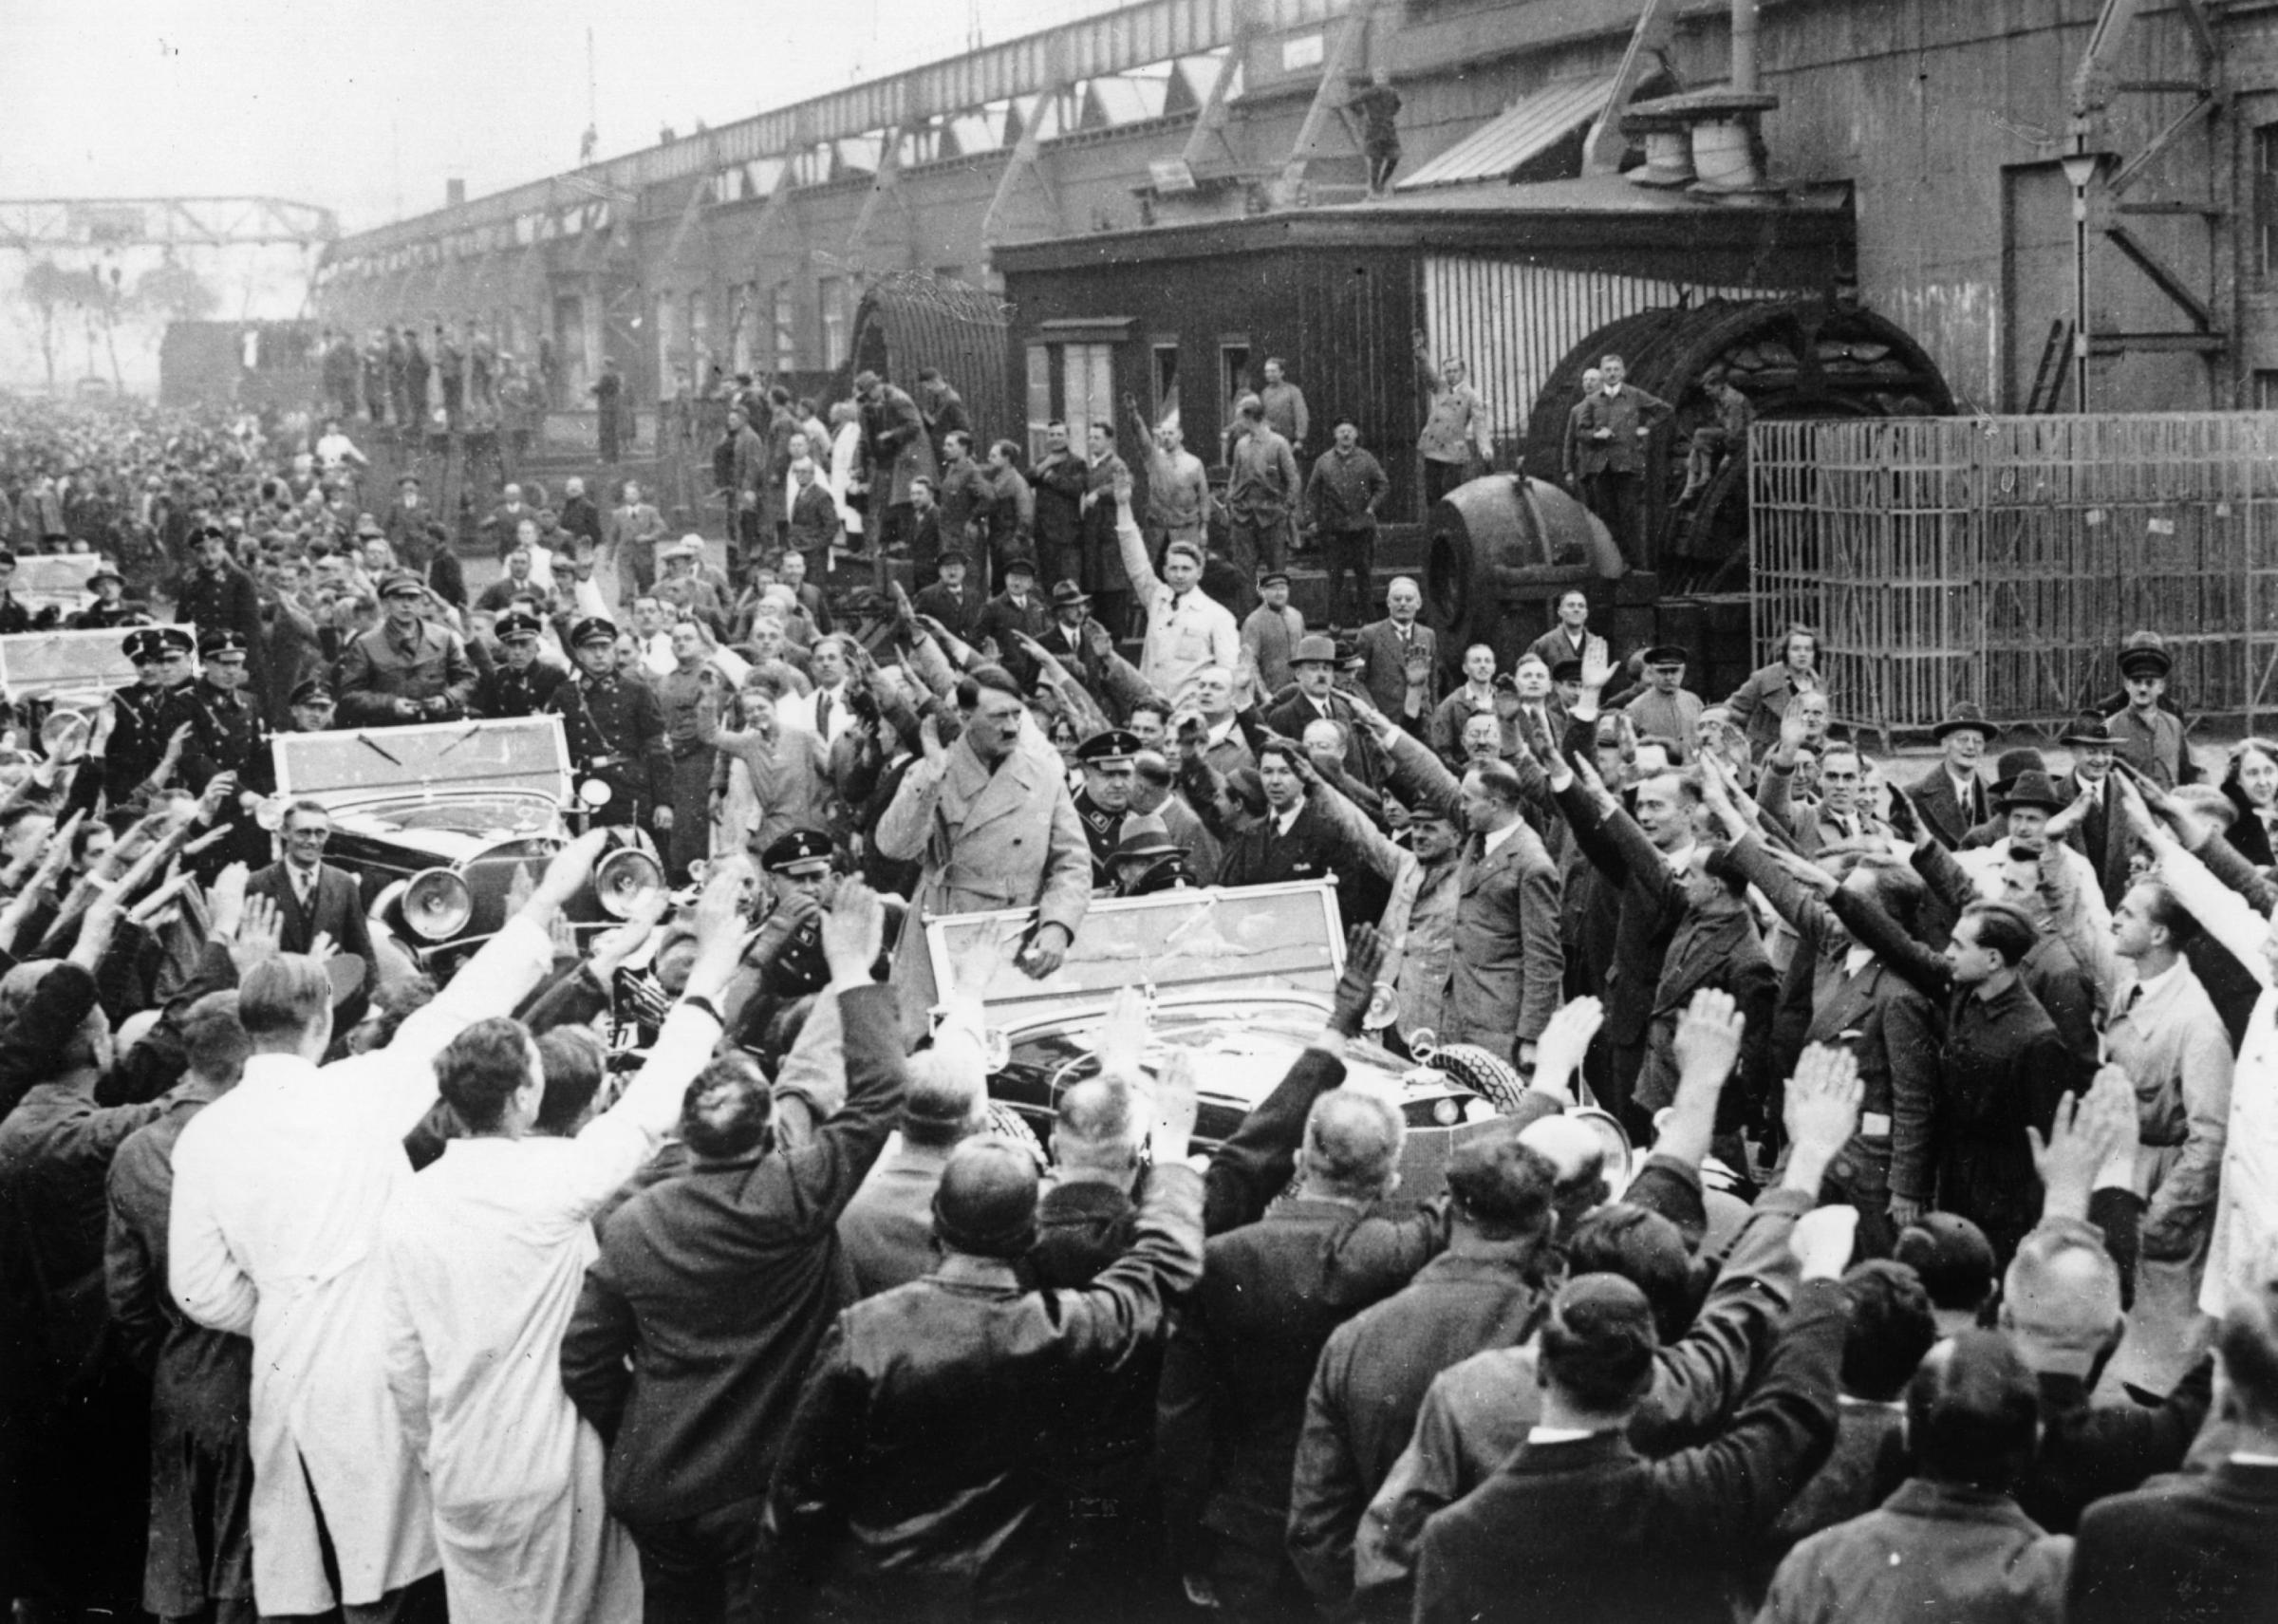 11th November 1933: German dictator Adolf Hitler (1889 - 1945) leaving the Siemens works, after making his final speech prior to the German election. (Photo by Keystone/Getty Images).